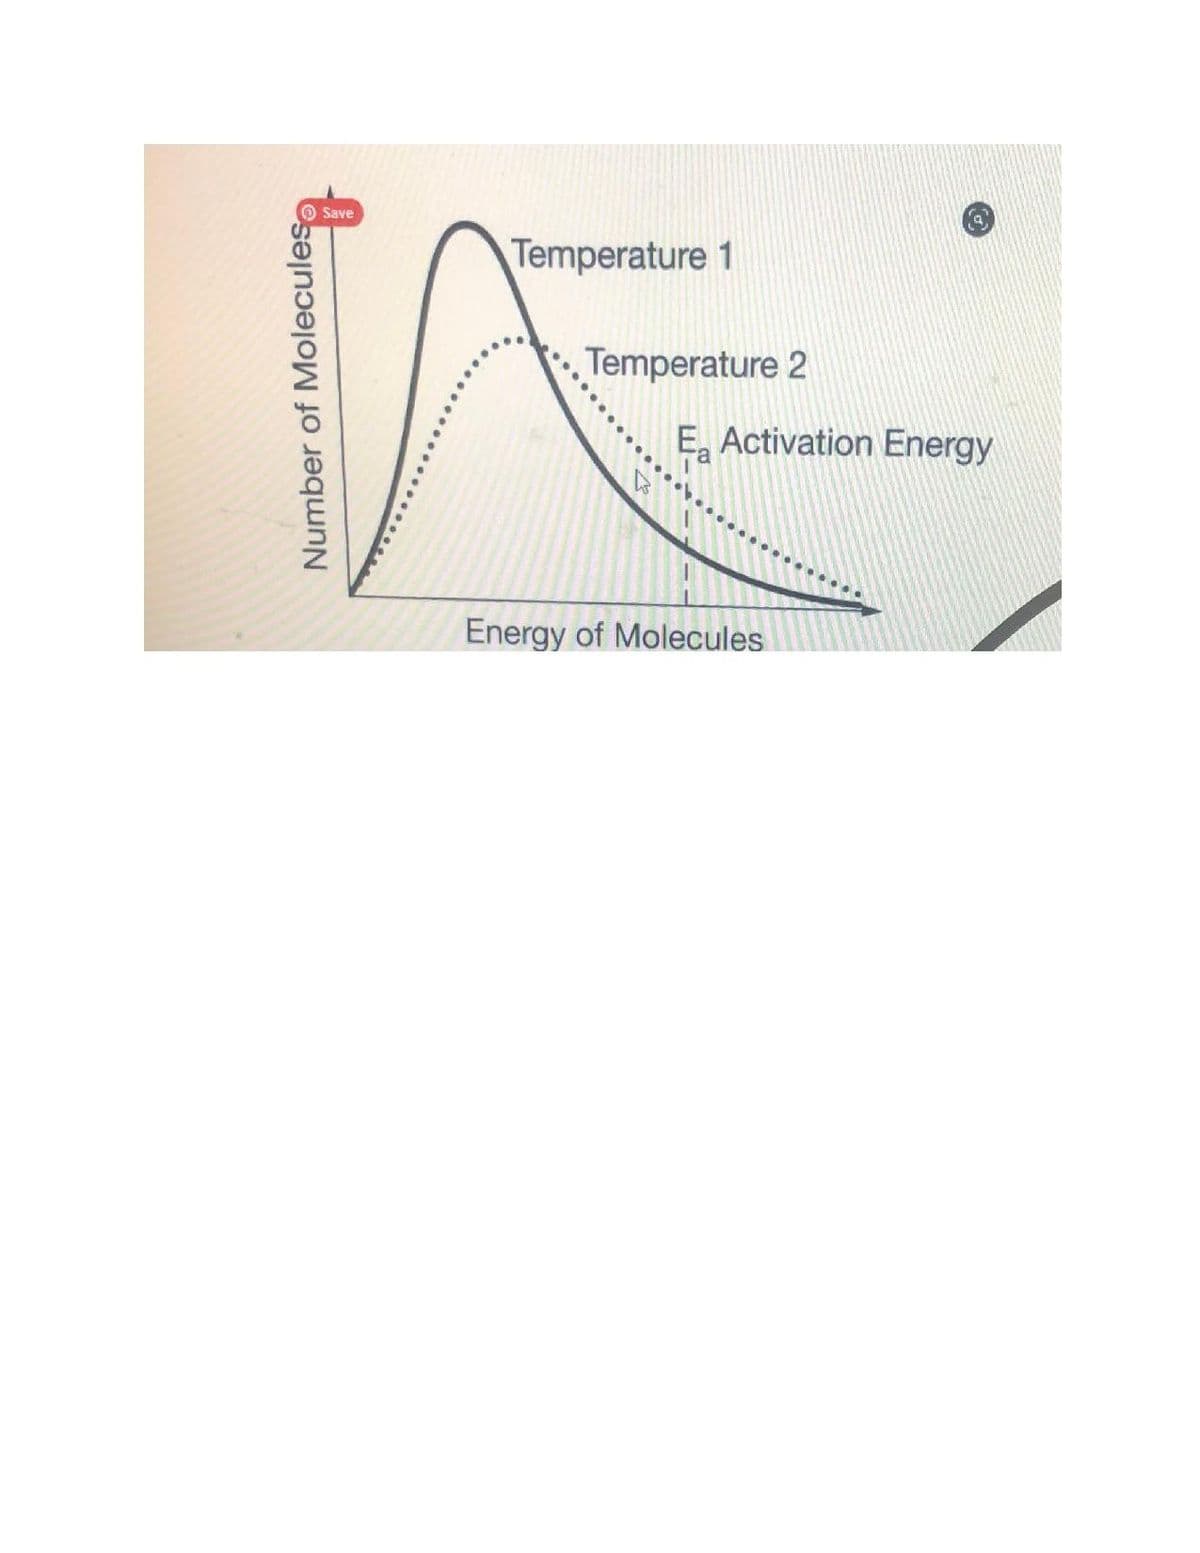 O Save
Temperature 1
Temperature 2
E, Activation Energy
Energy of Molecules
Number of Molecules
